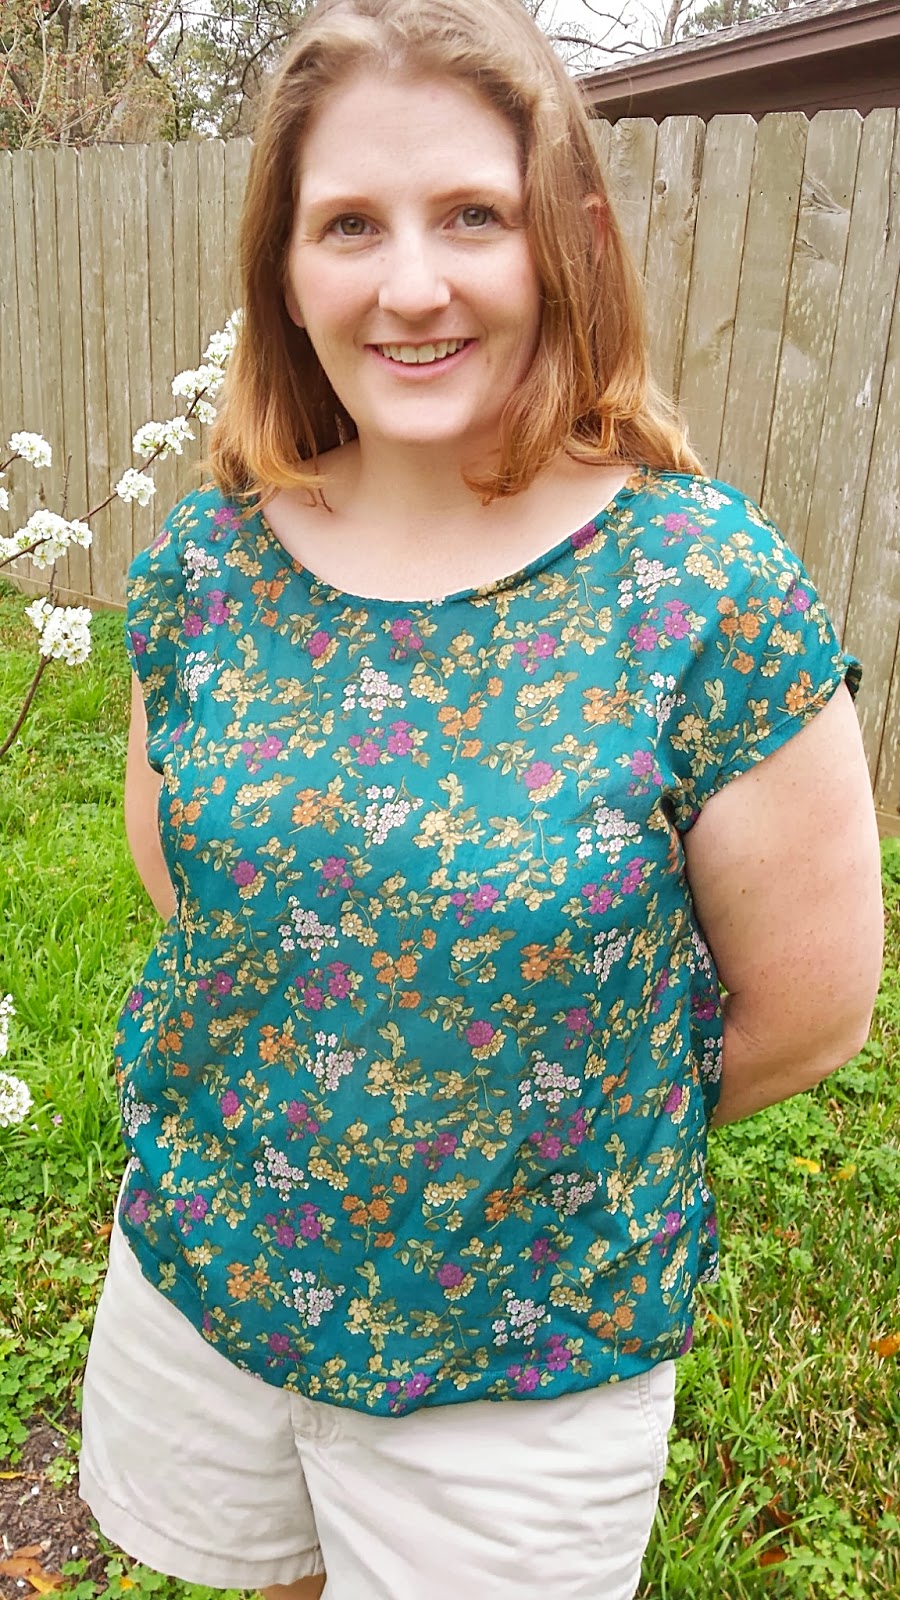 Stacie Thinks She Can: Scout Tee vs. Simplicity 1690